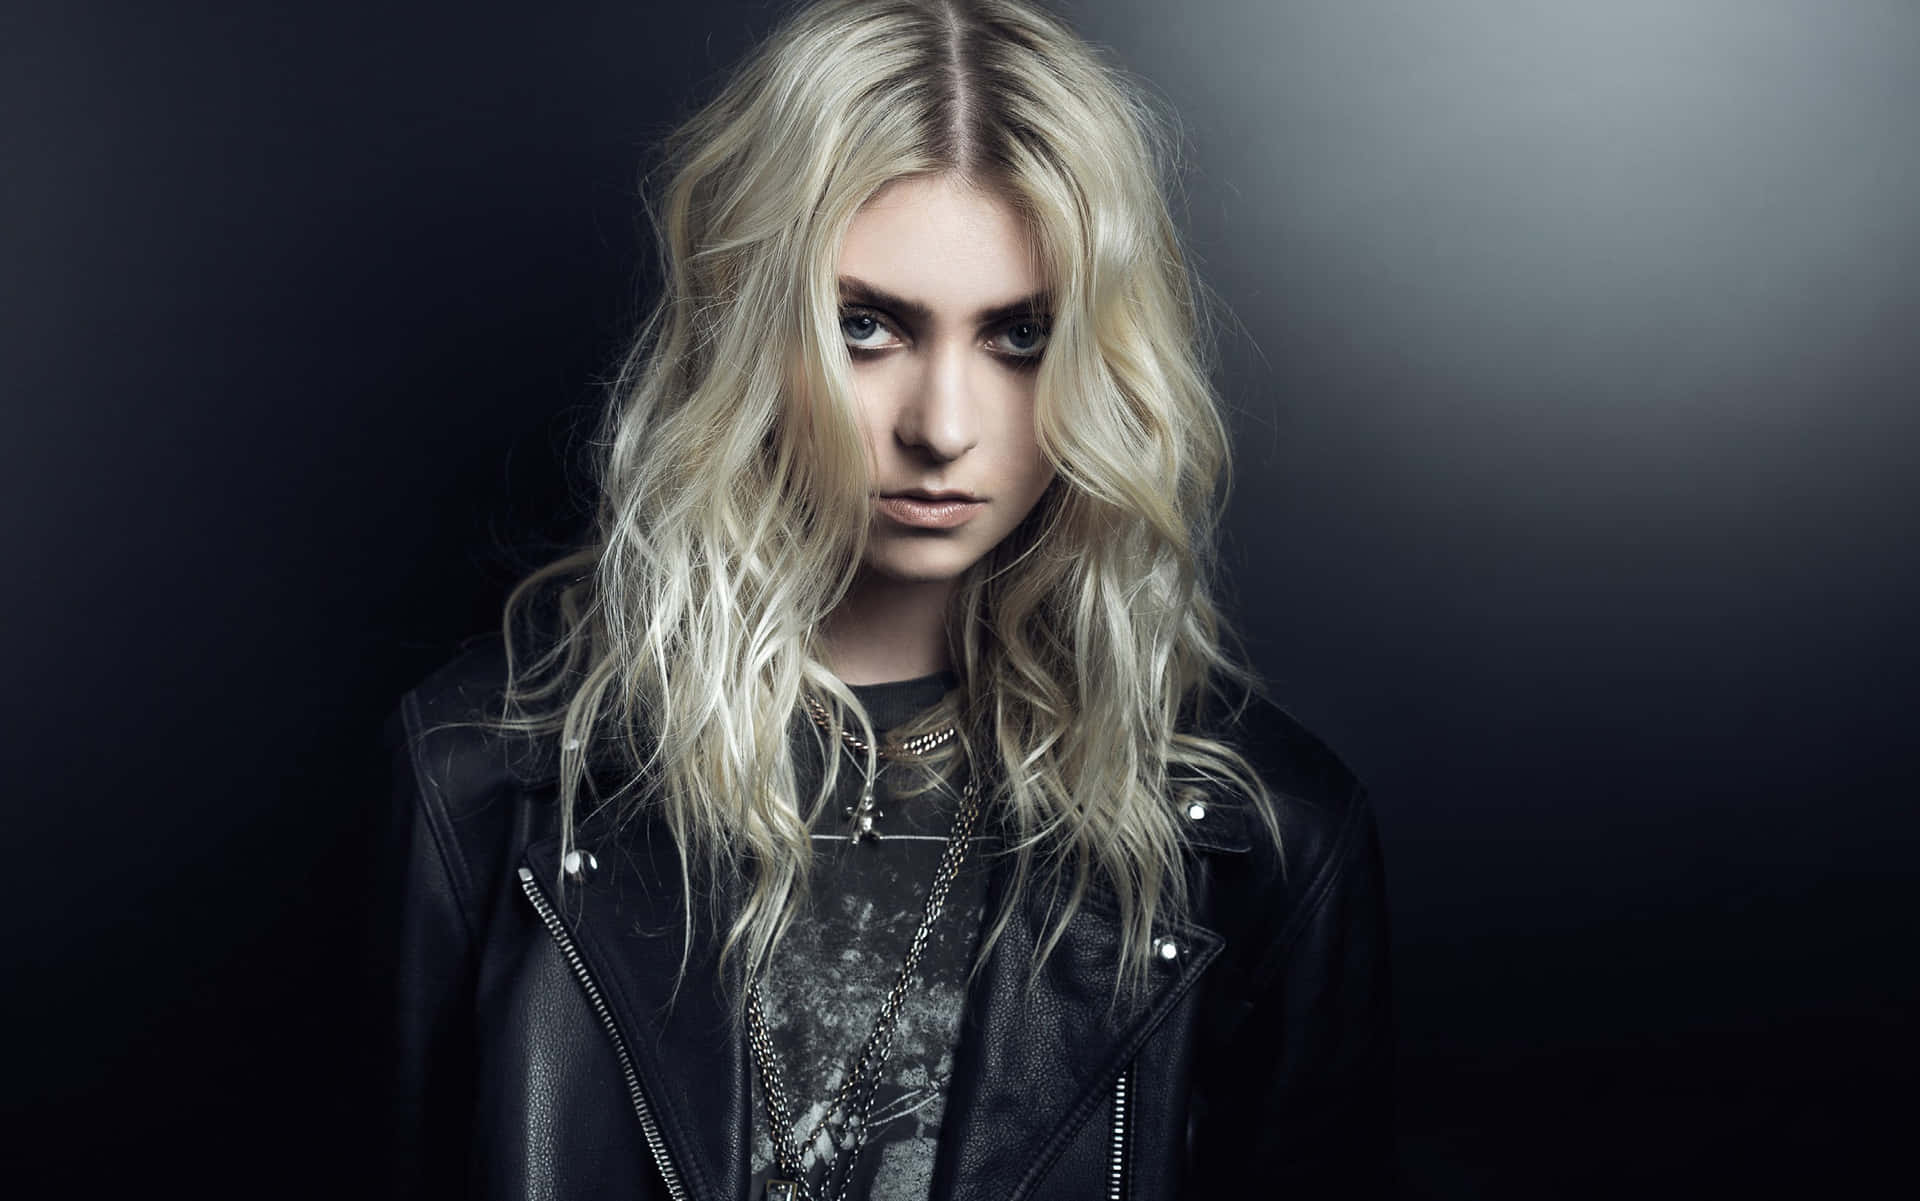 Serius Face Of The Singer Of The Pretty Reckless Band Wallpaper